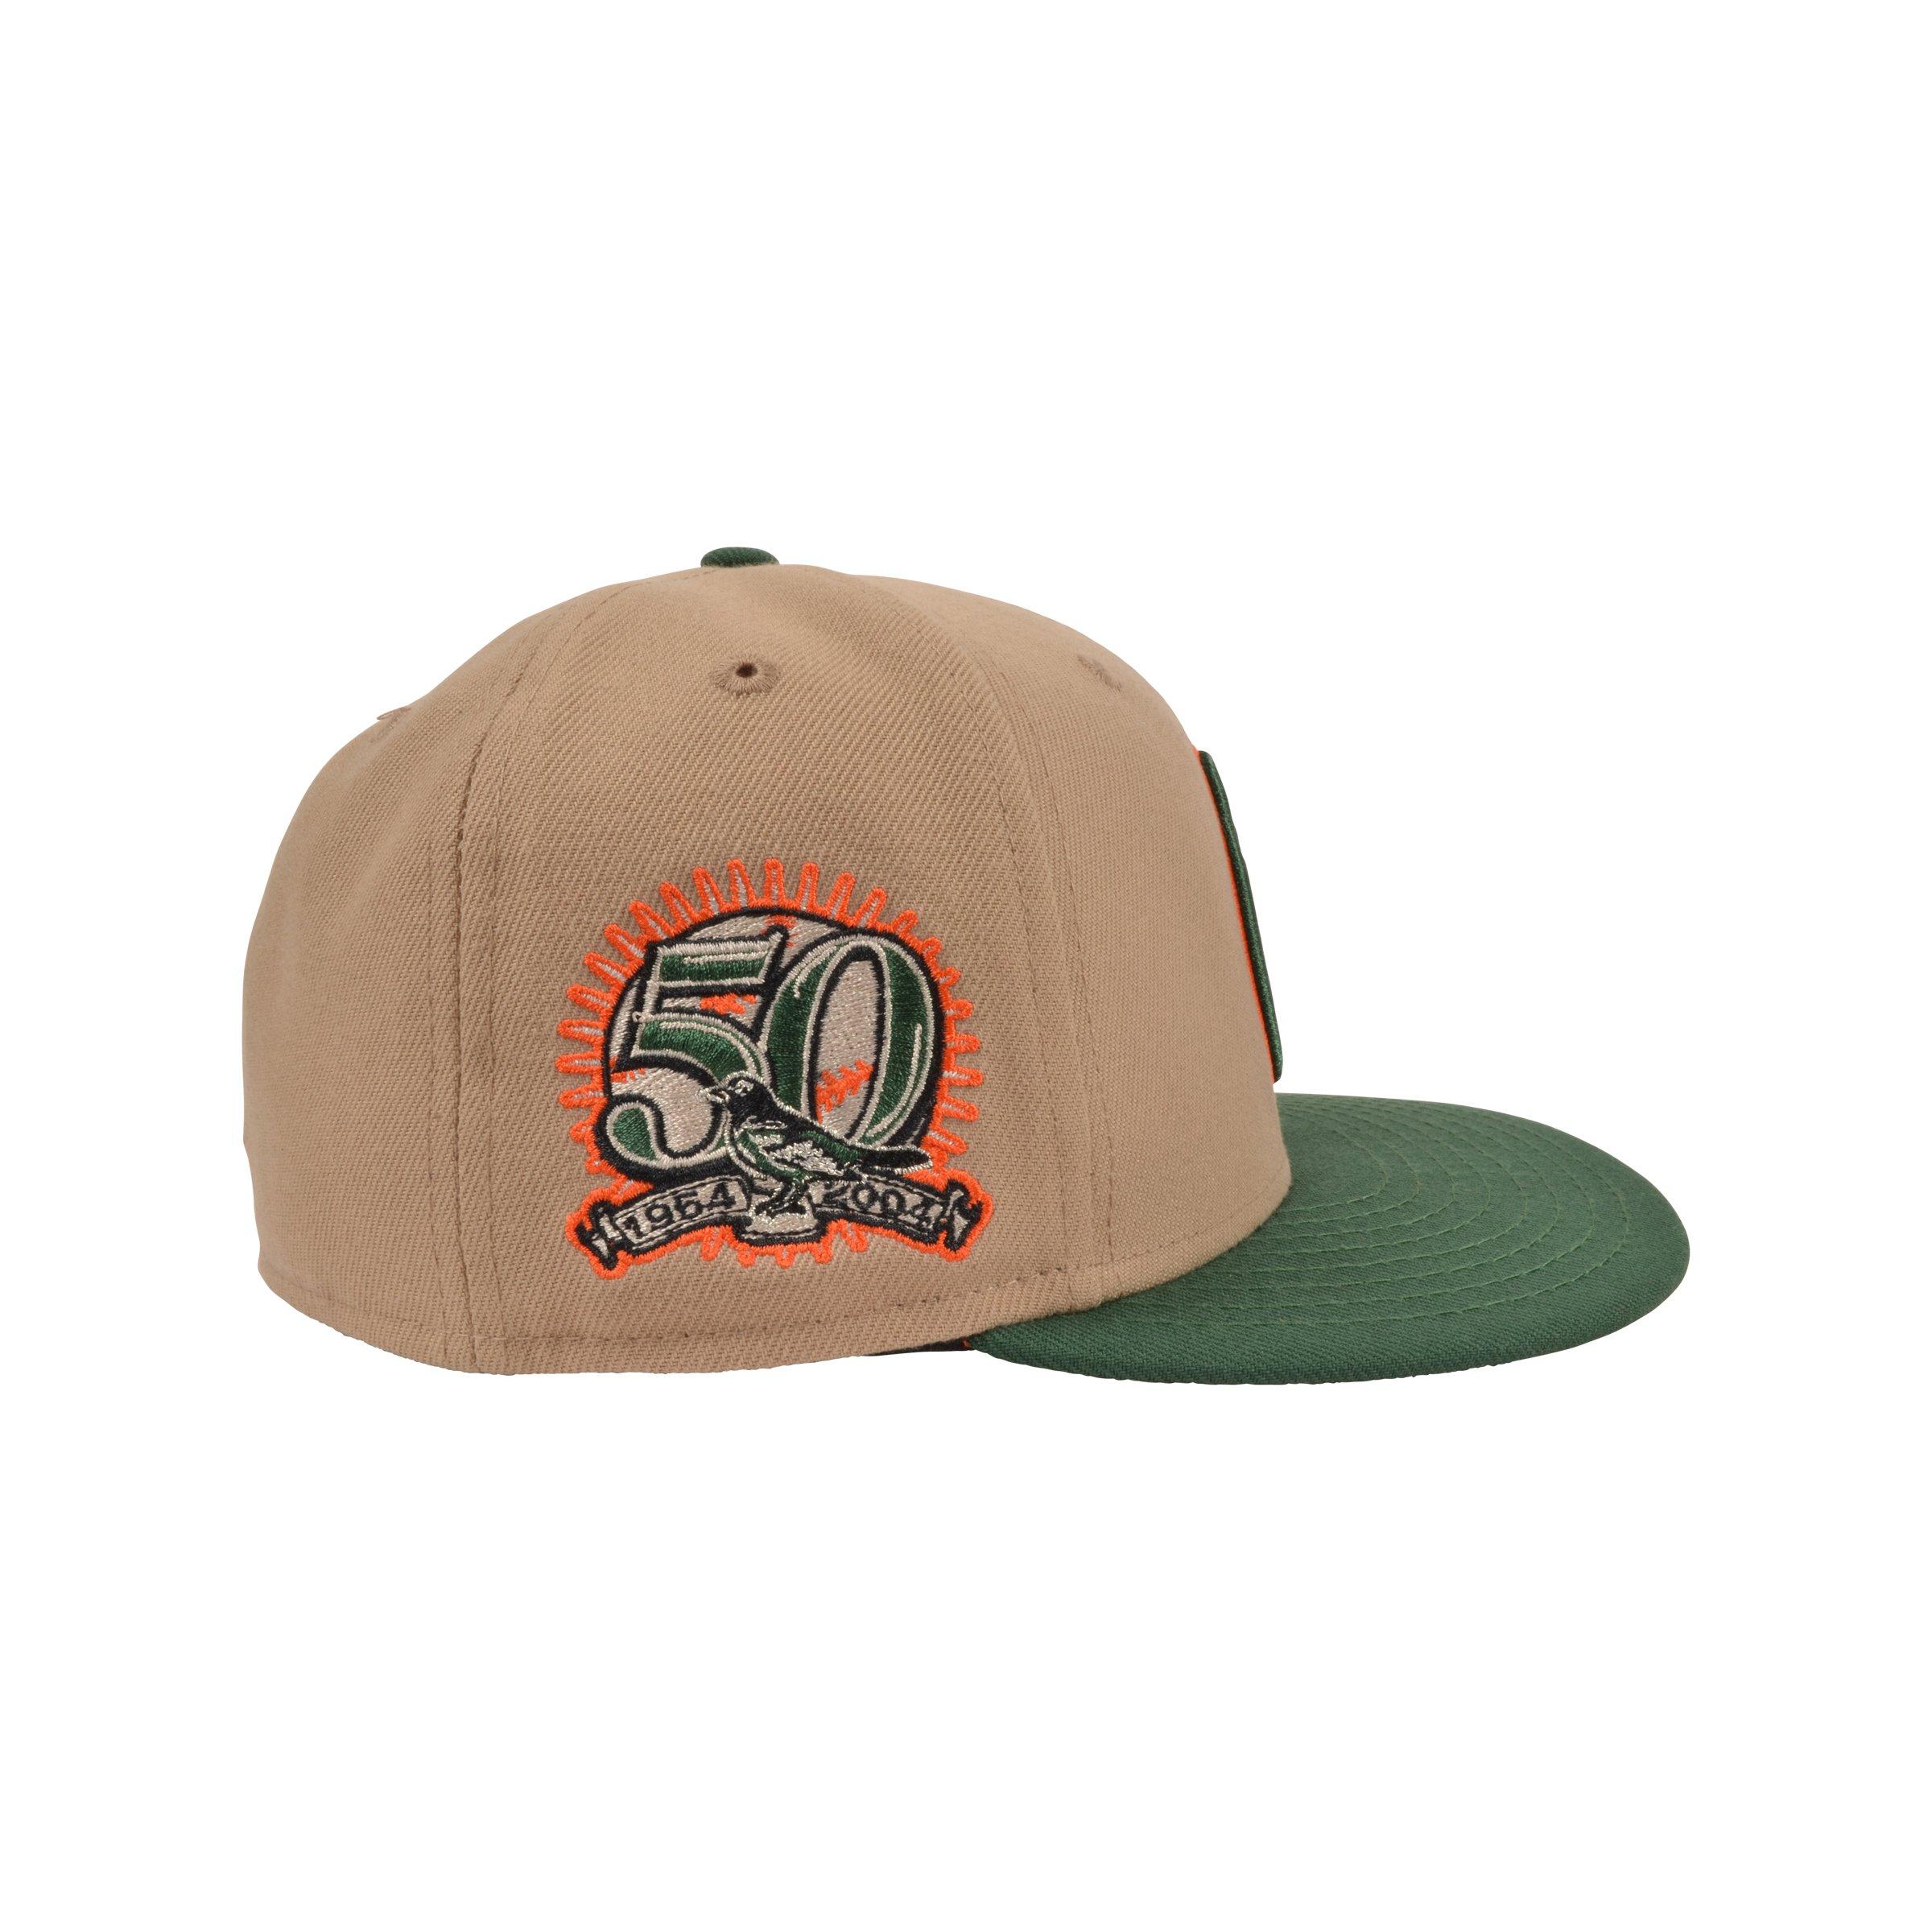 BALTIMORE ORIOLES 50TH ANNIVERSARY AN ITALIAN EATERY NEW ERA FITTED CA –  SHIPPING DEPT